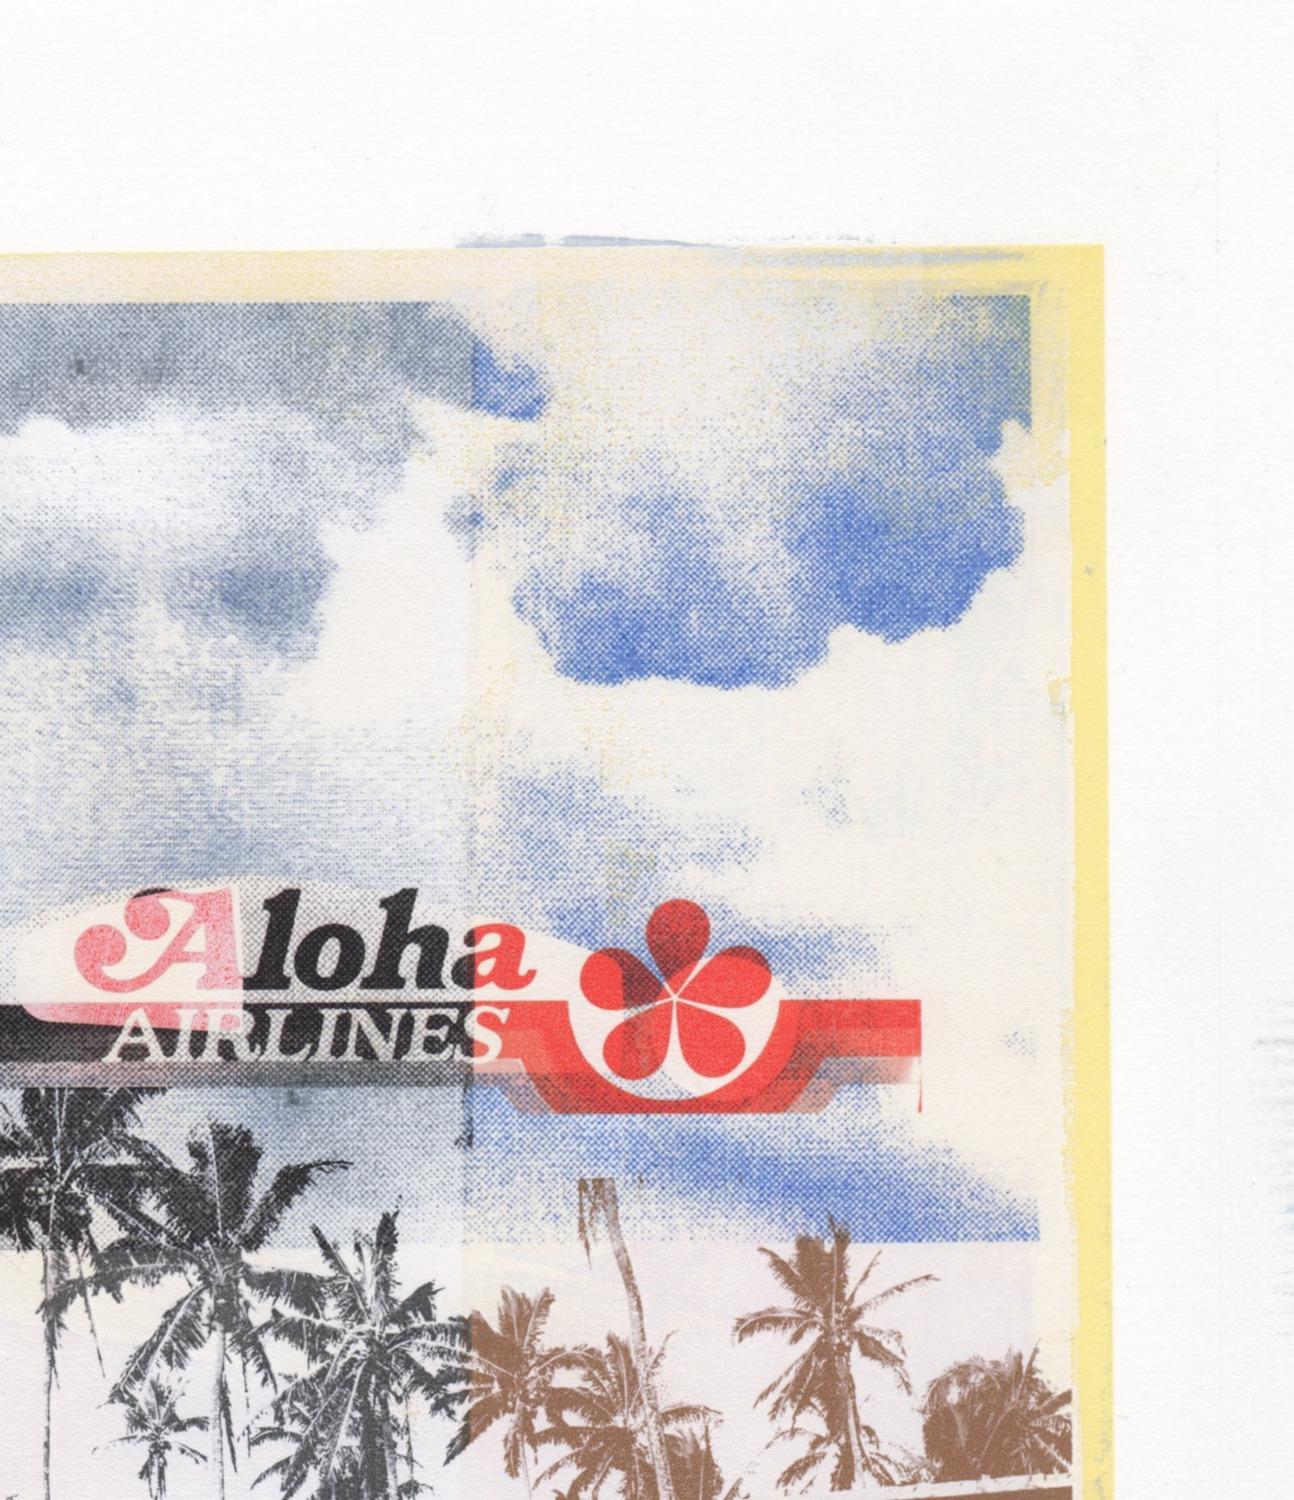 Cropped and deconstructed images of clouds, palm trees, an abandoned Hawaiian hotel facade, a car, an Aloha Airlines vintage trademark, a beach chair and a vintage photo of the two ladies in skirts are represented on 14 x 11 inch Awagami Bamboo